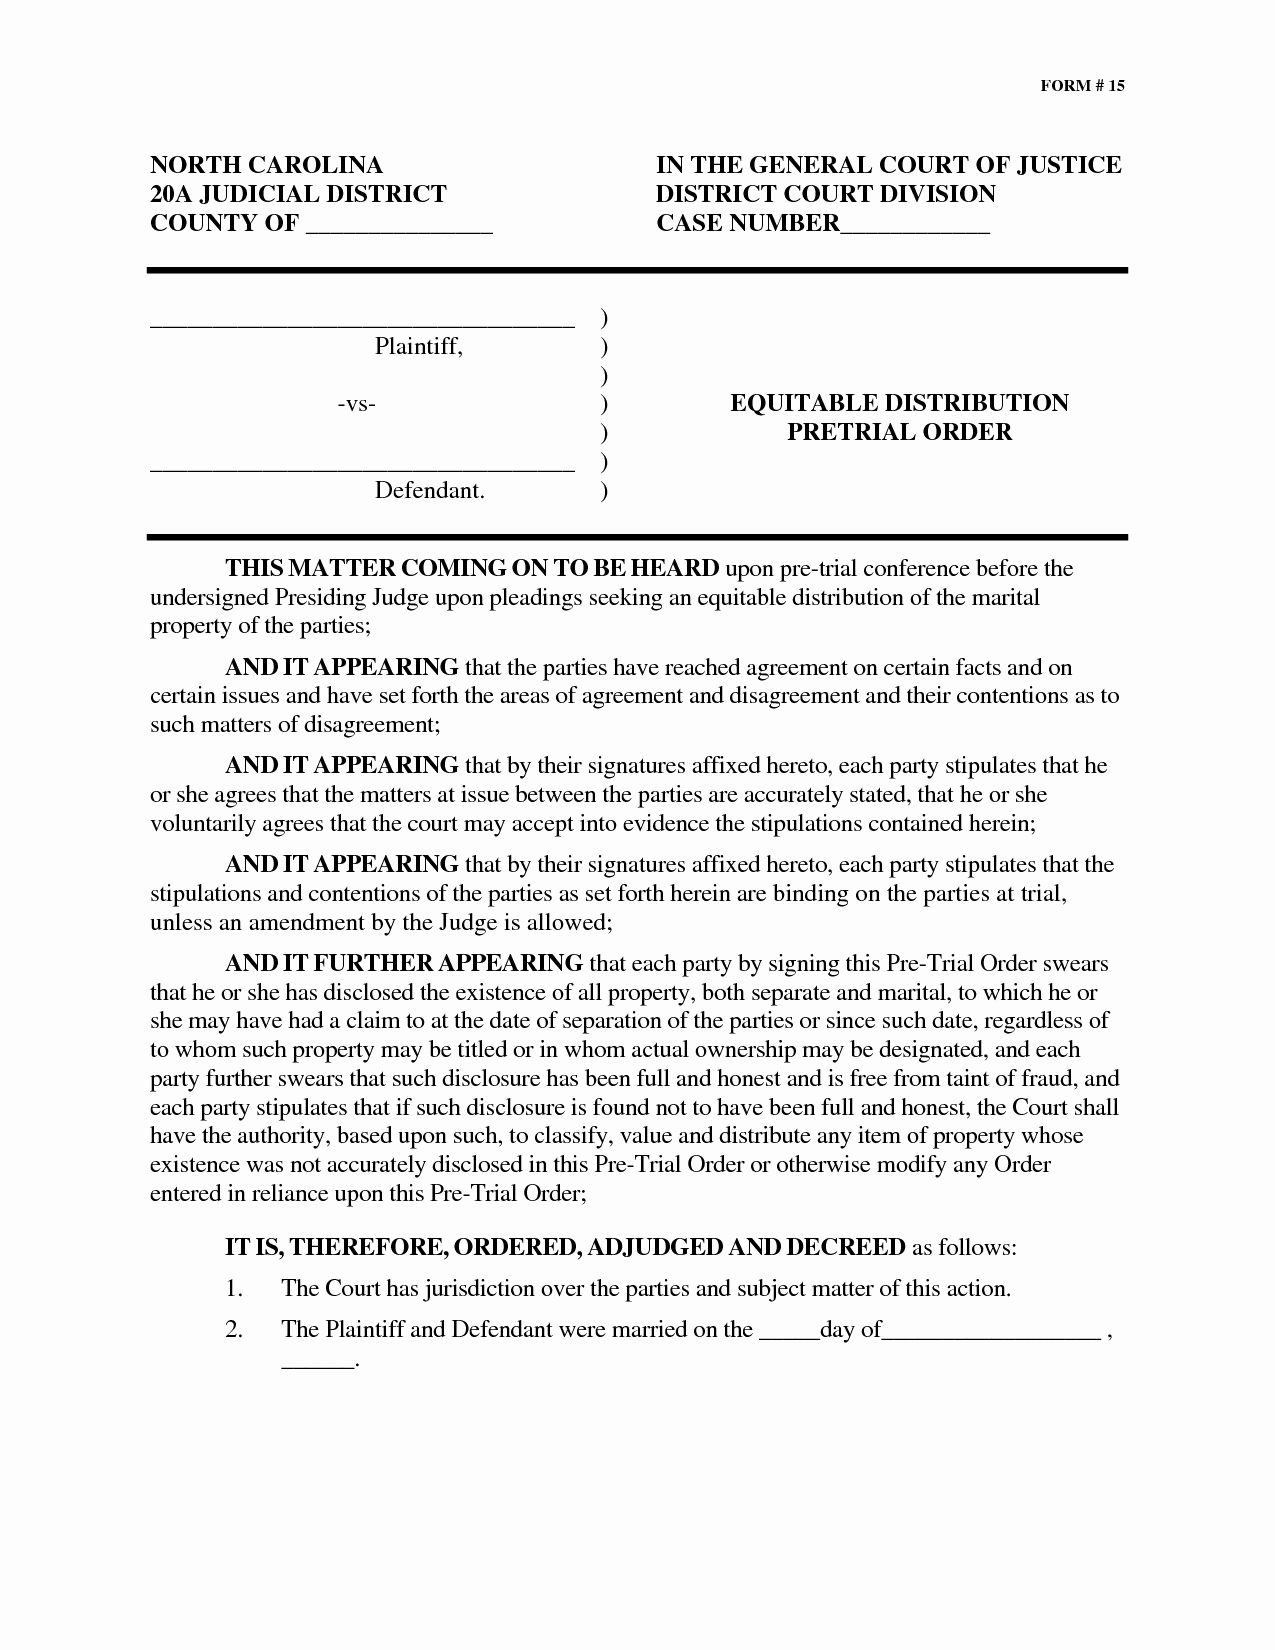 Separation Agreement Nc Template Fresh Best S Of Free Marital Separation Agreement forms